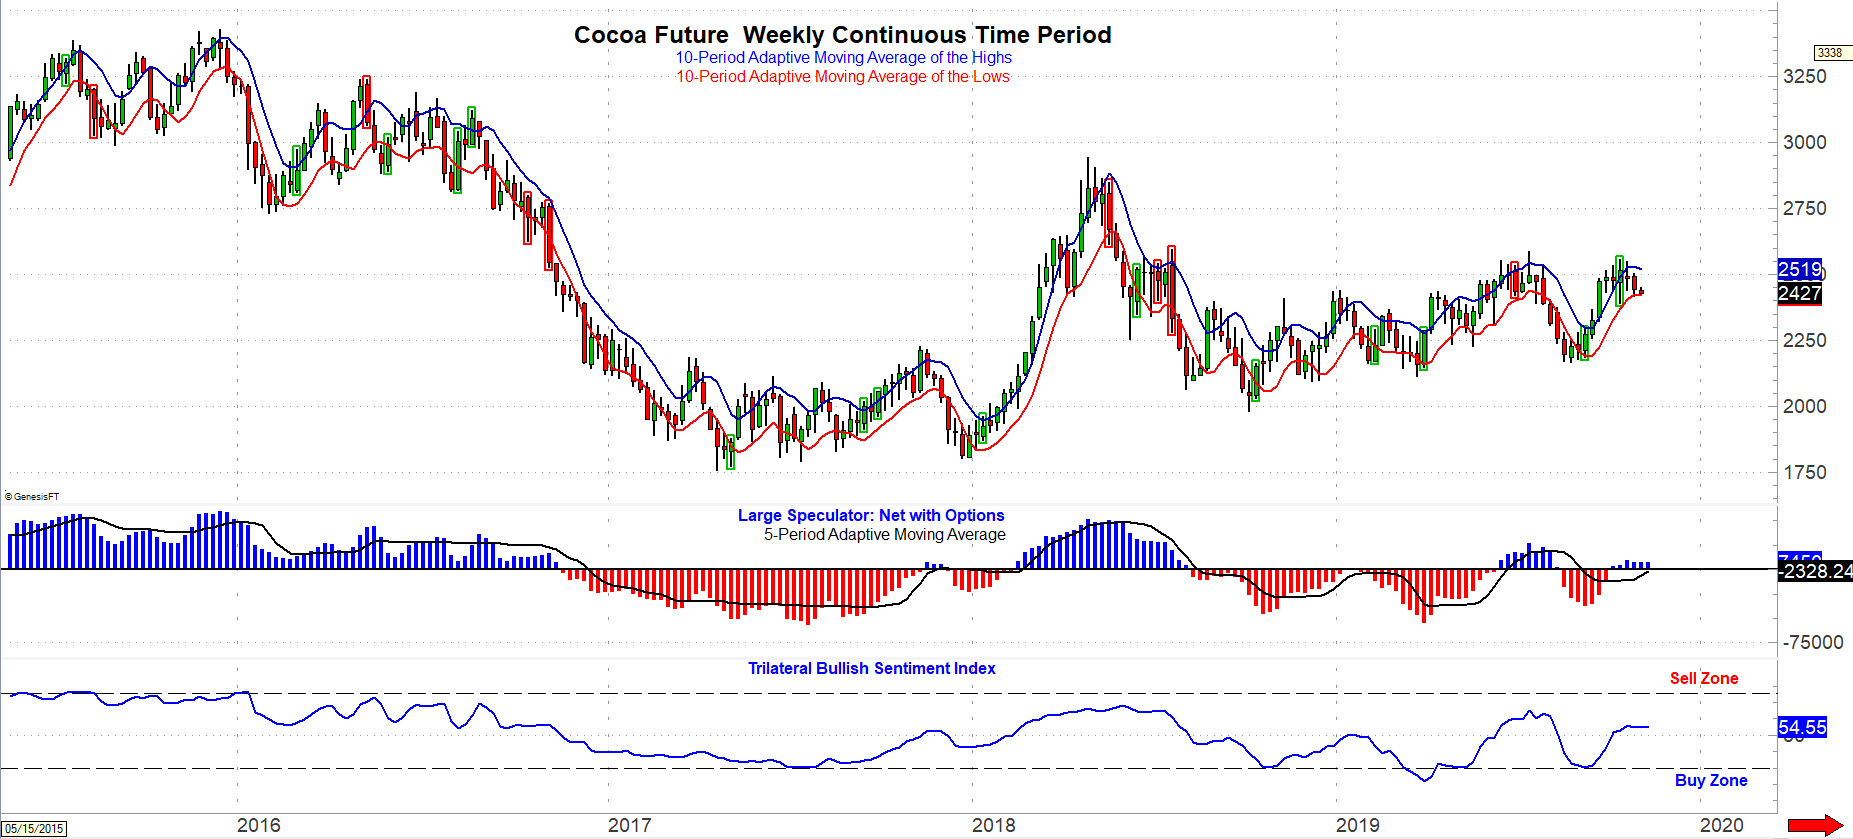 Weekly Continuous Cocoa Futures